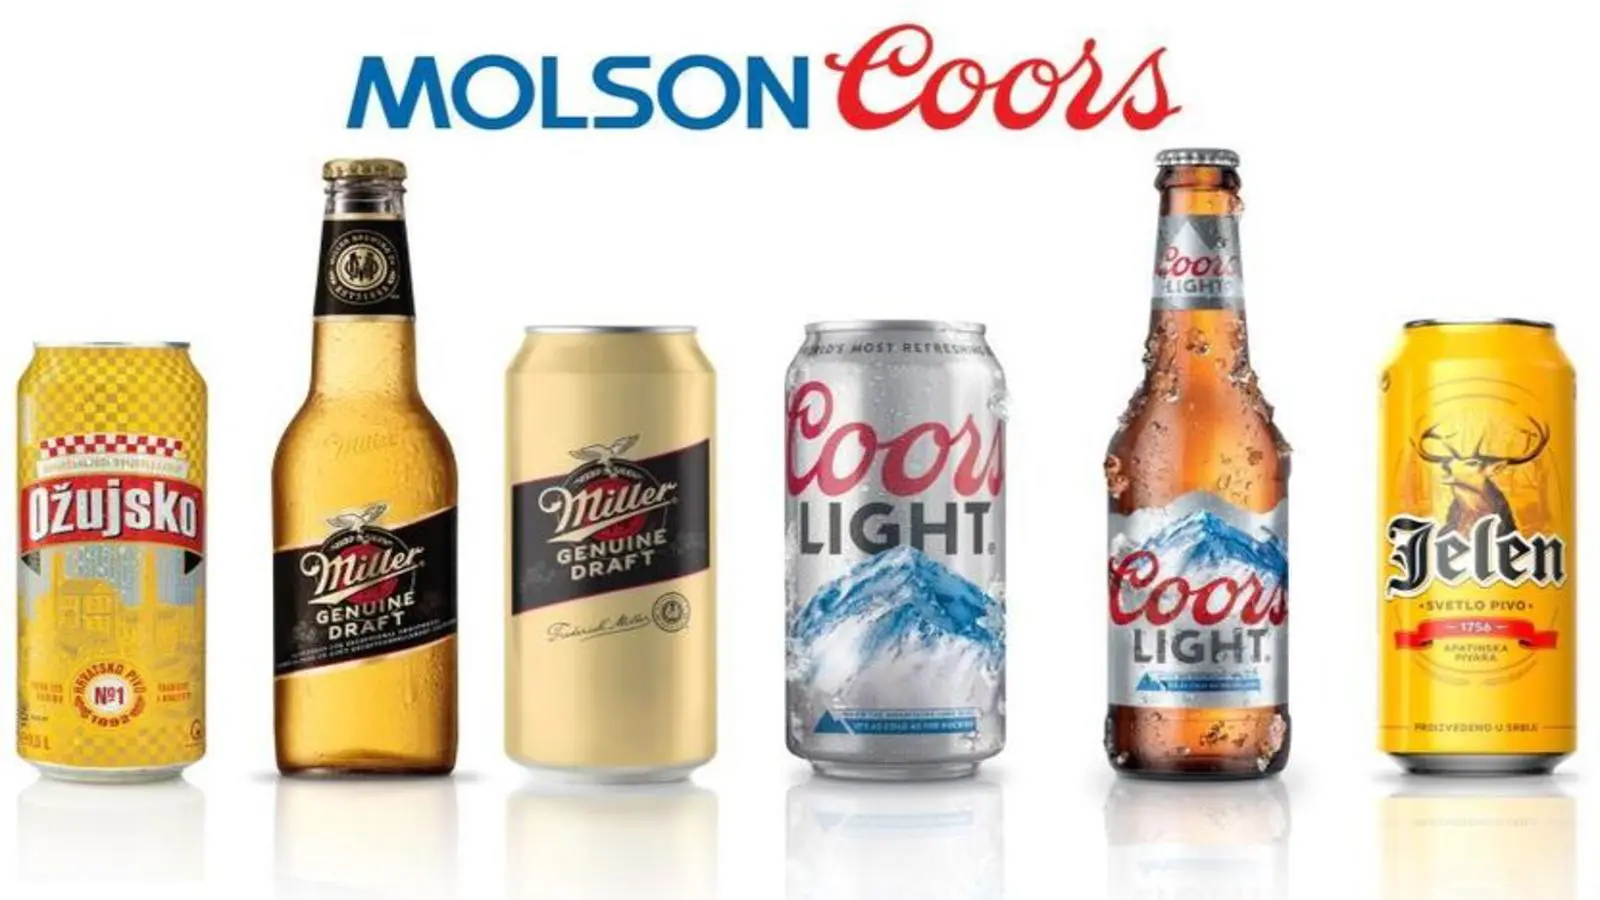 Molson Coors shifts focus from the declining beer sector to emerging beverage categories